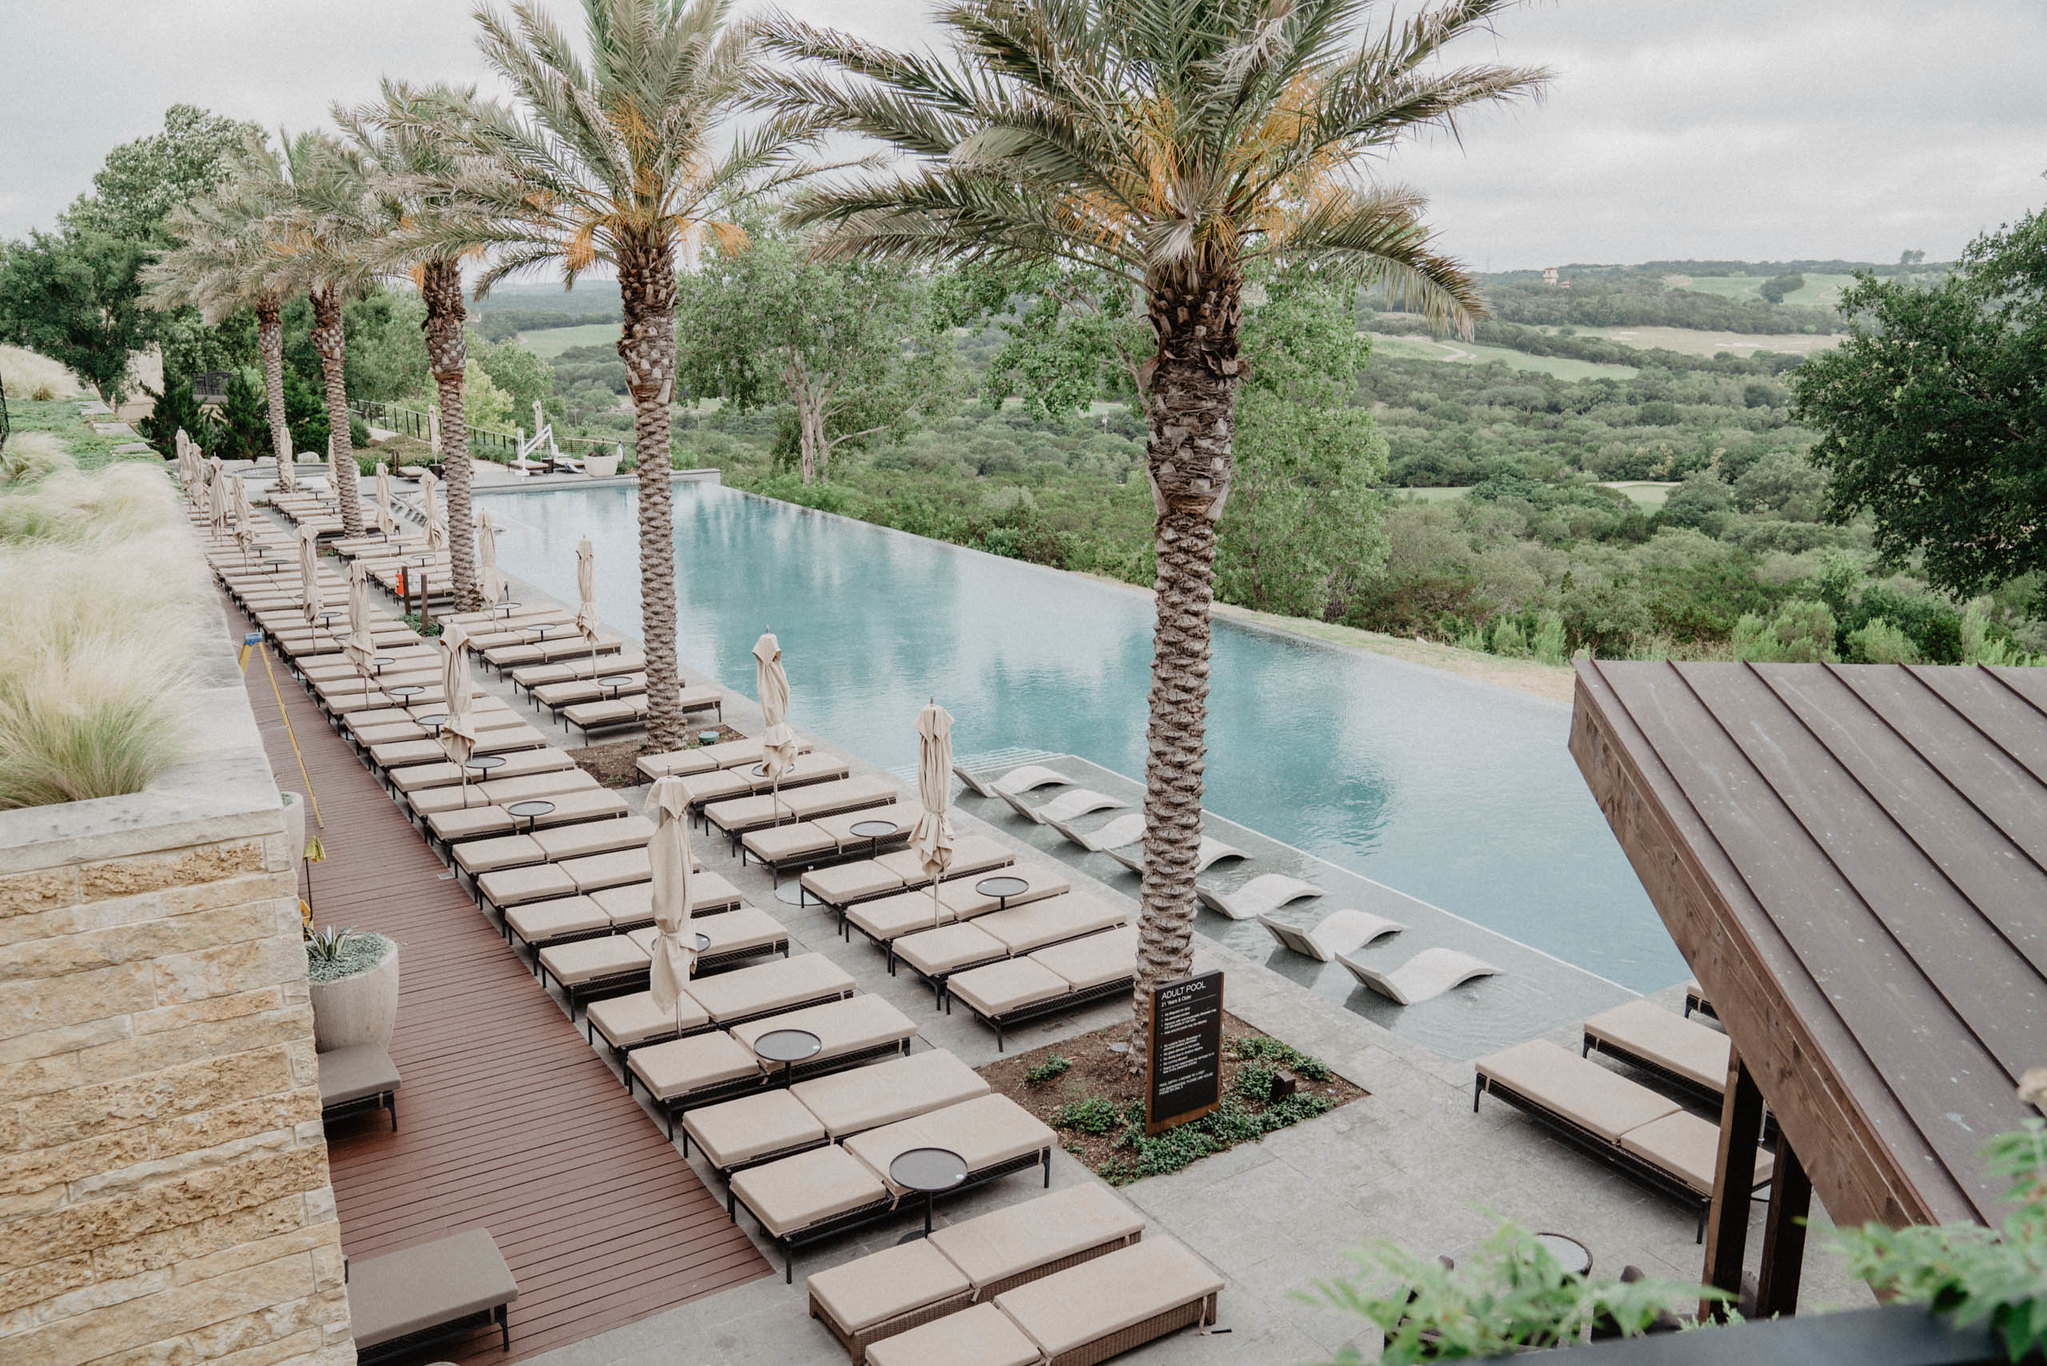 Adults Only: Seven La Cantera Resort & Spa – the TRAVEL ABSTRACT